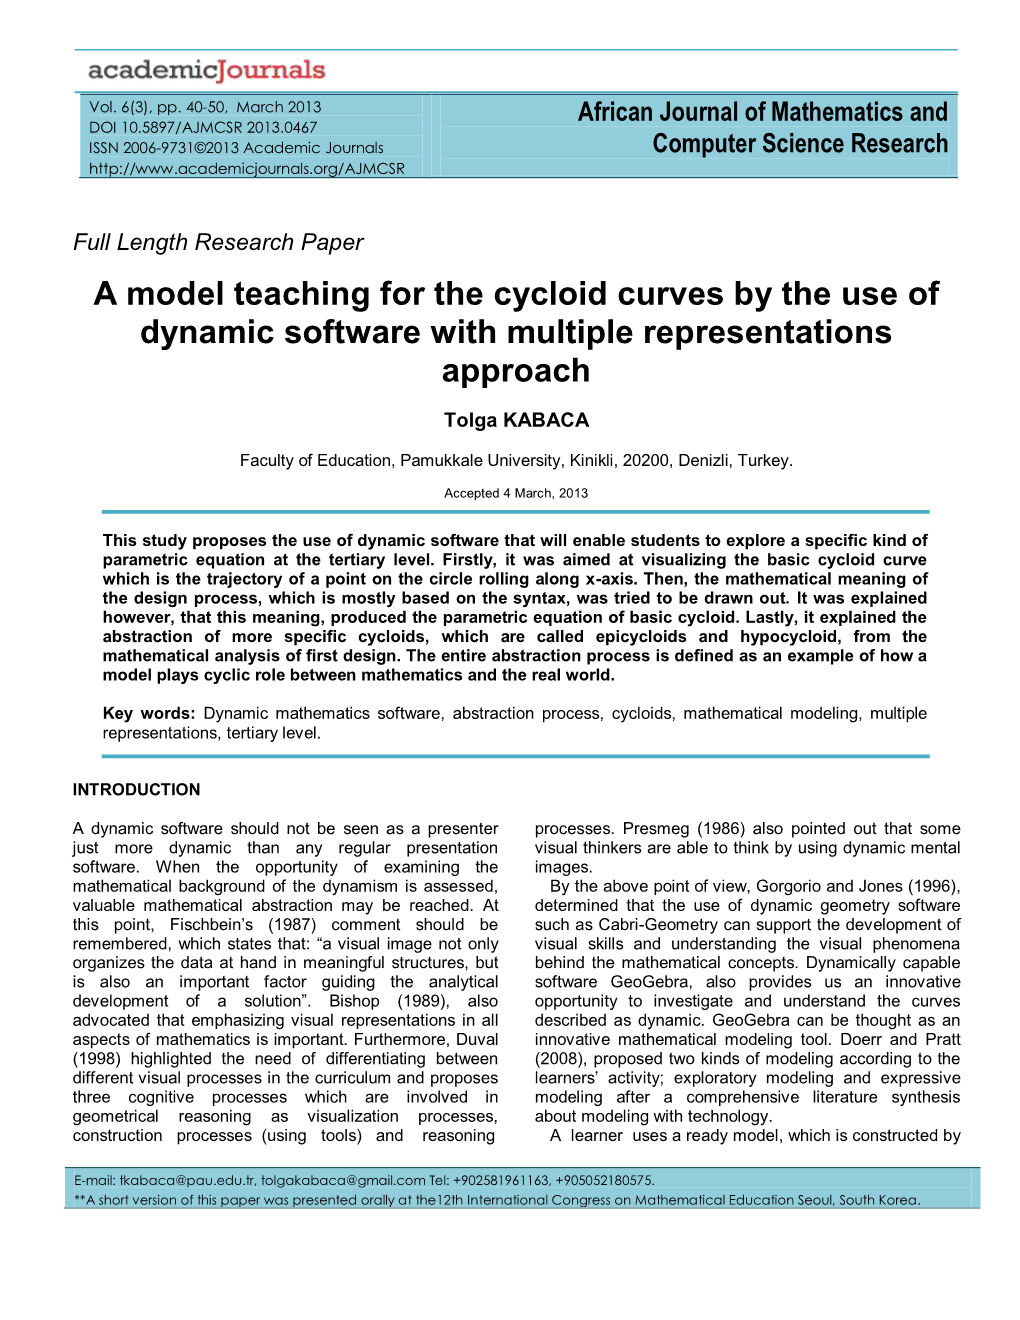 A Model Teaching for the Cycloid Curves by the Use of Dynamic Software with Multiple Representations Approach